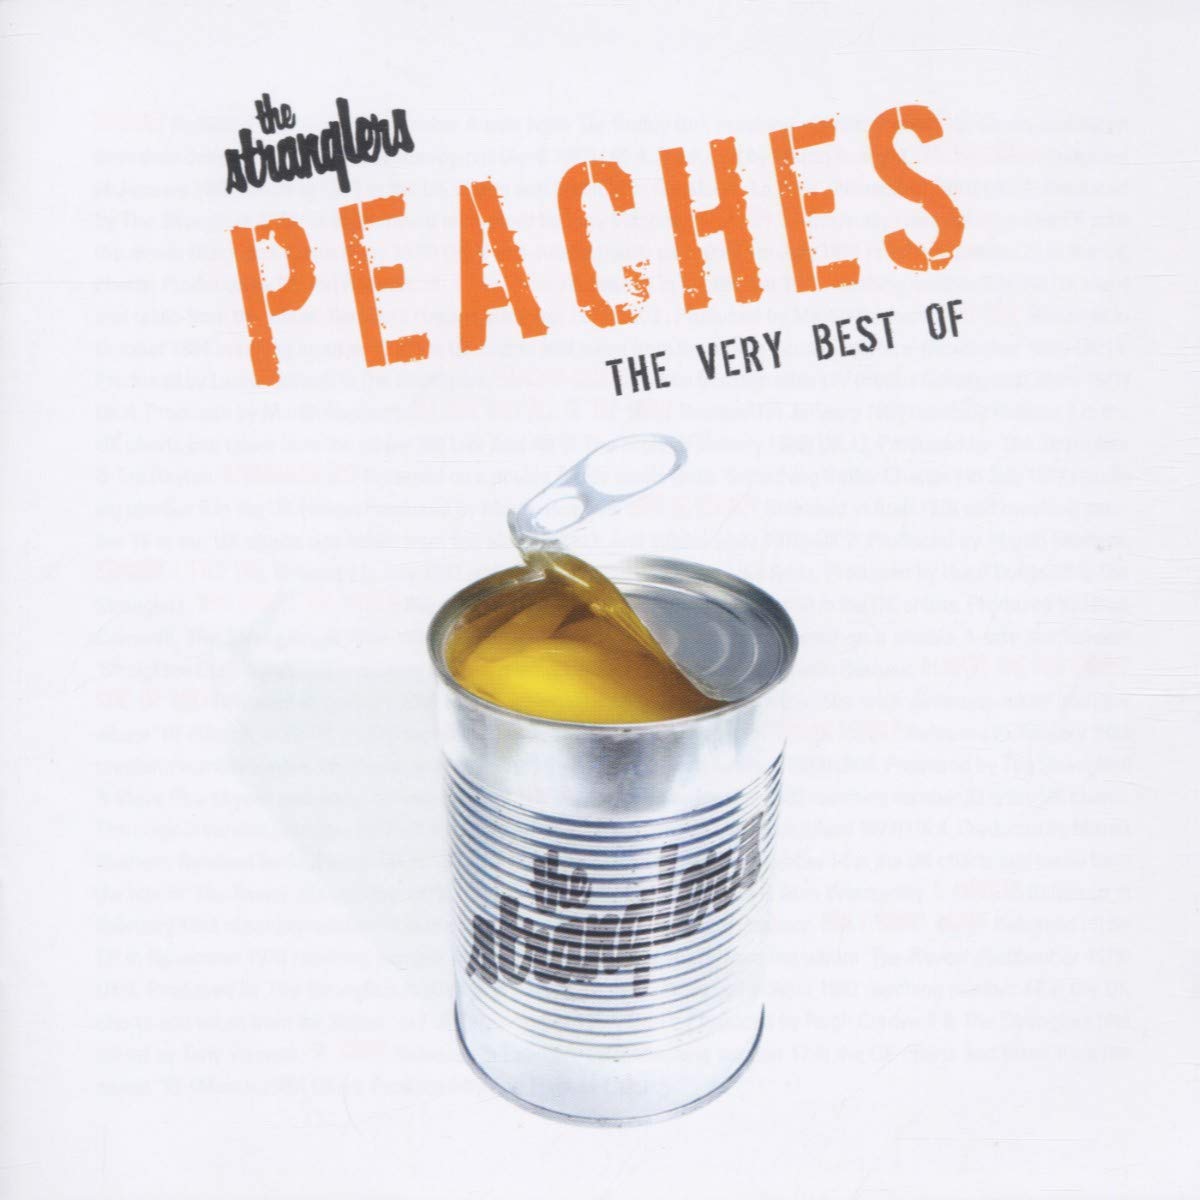 The Stranglers "Peaches - The Very Best" 2LP